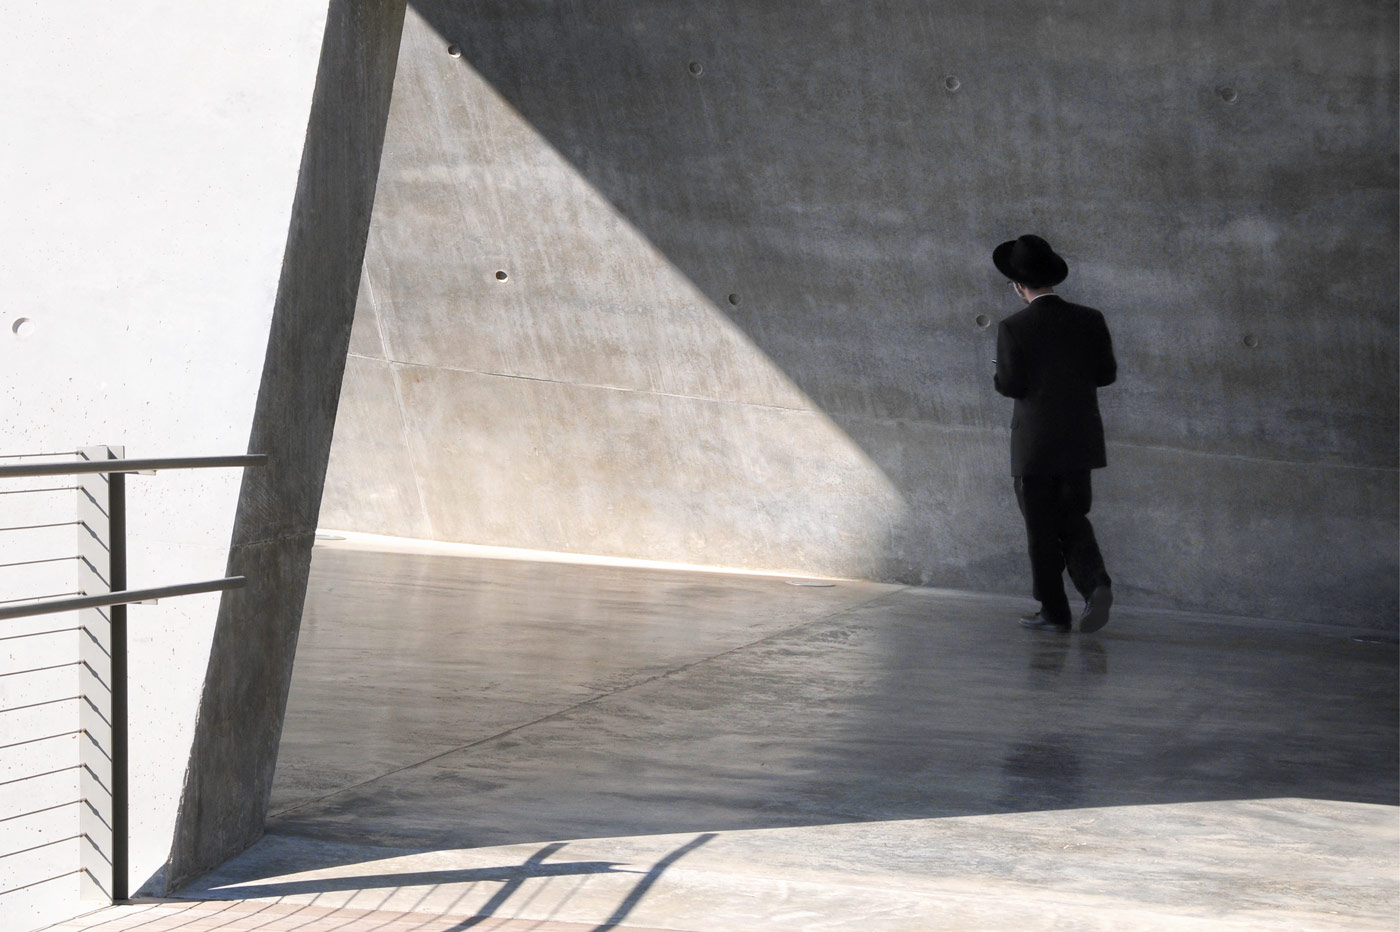 Yad Vashem, Israel's official memorial to the Jewish victims of the Holocaust, Jerusalem, 2008